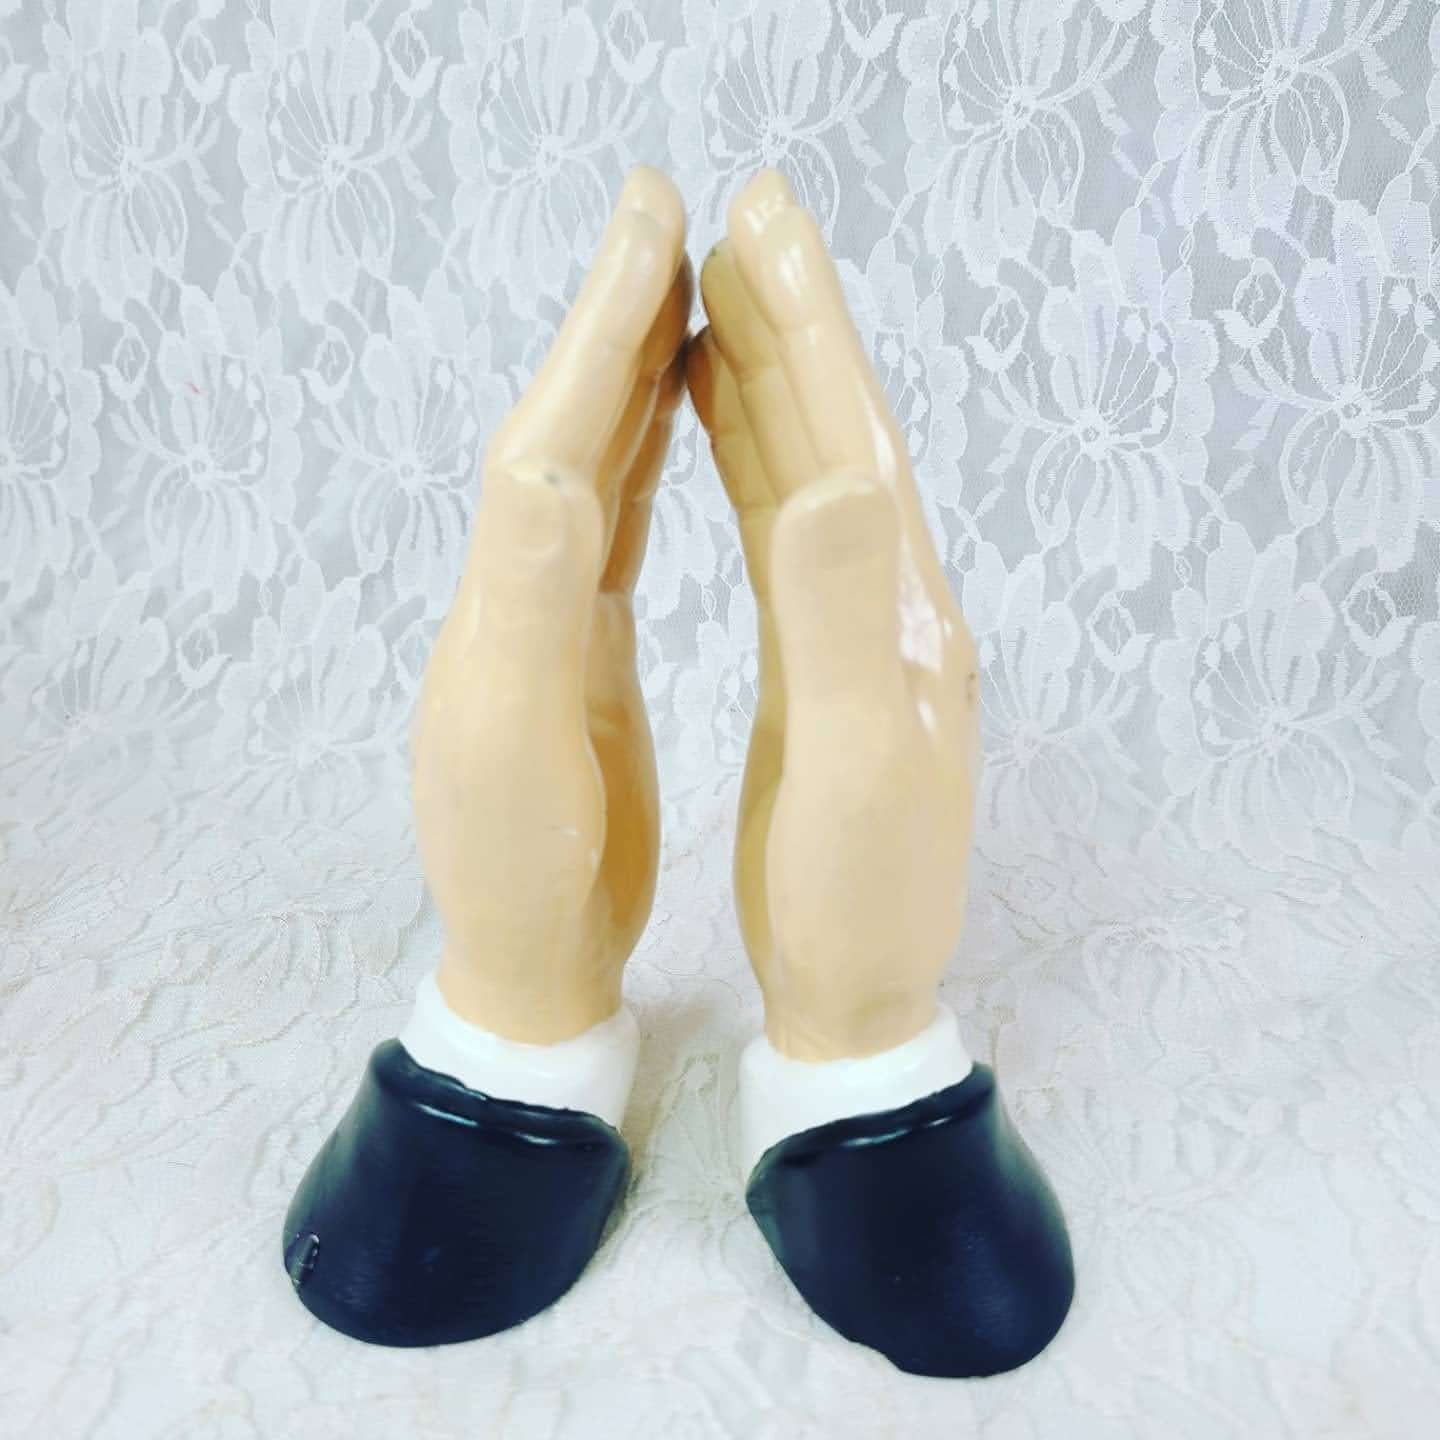 Set of Two PRAYING Hands ~ Ceramic ~ Signed ~ Religious ~ Paintable for Crafting ~ 8" tall by 4" wide ~ See ALL Pics